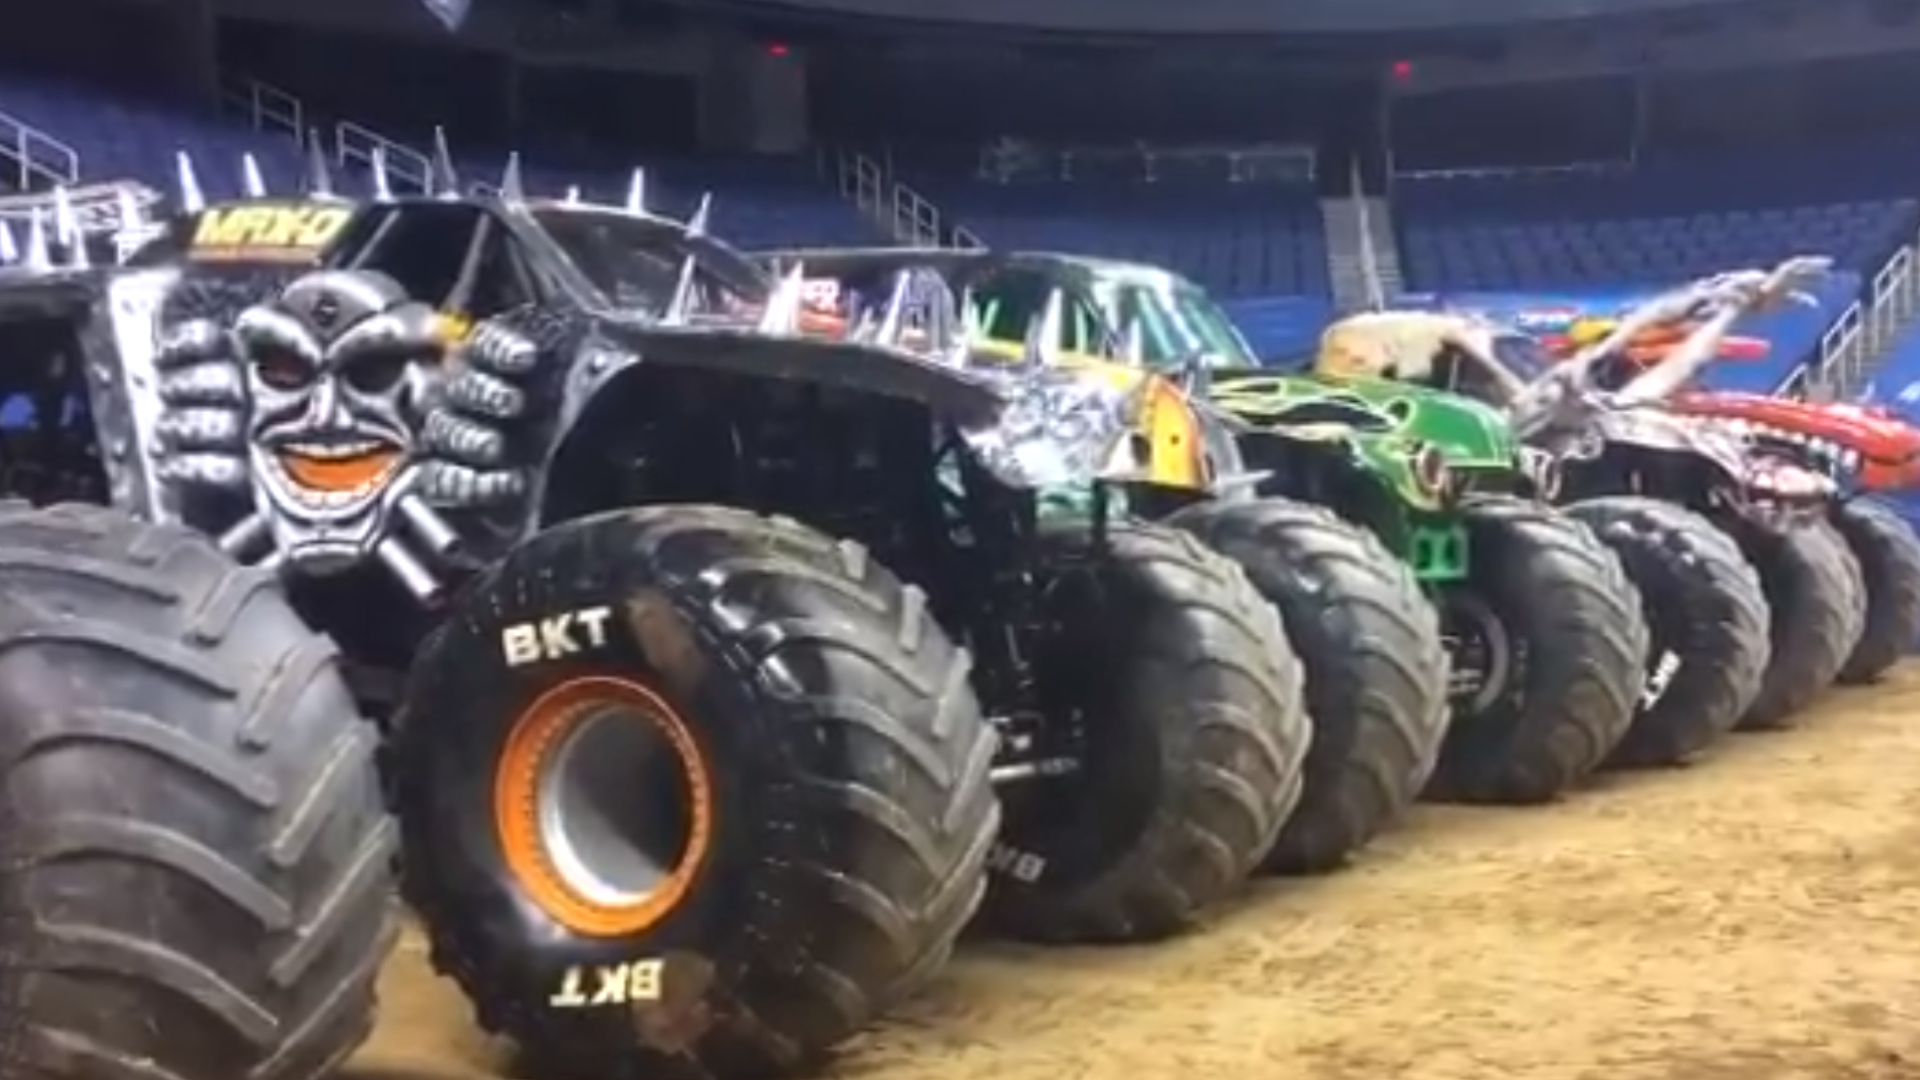 The 2019 season features eight of the most intense Monster Jam athletes.  You can expect six different competitions on a new level of high-flying and four-wheel excitement.